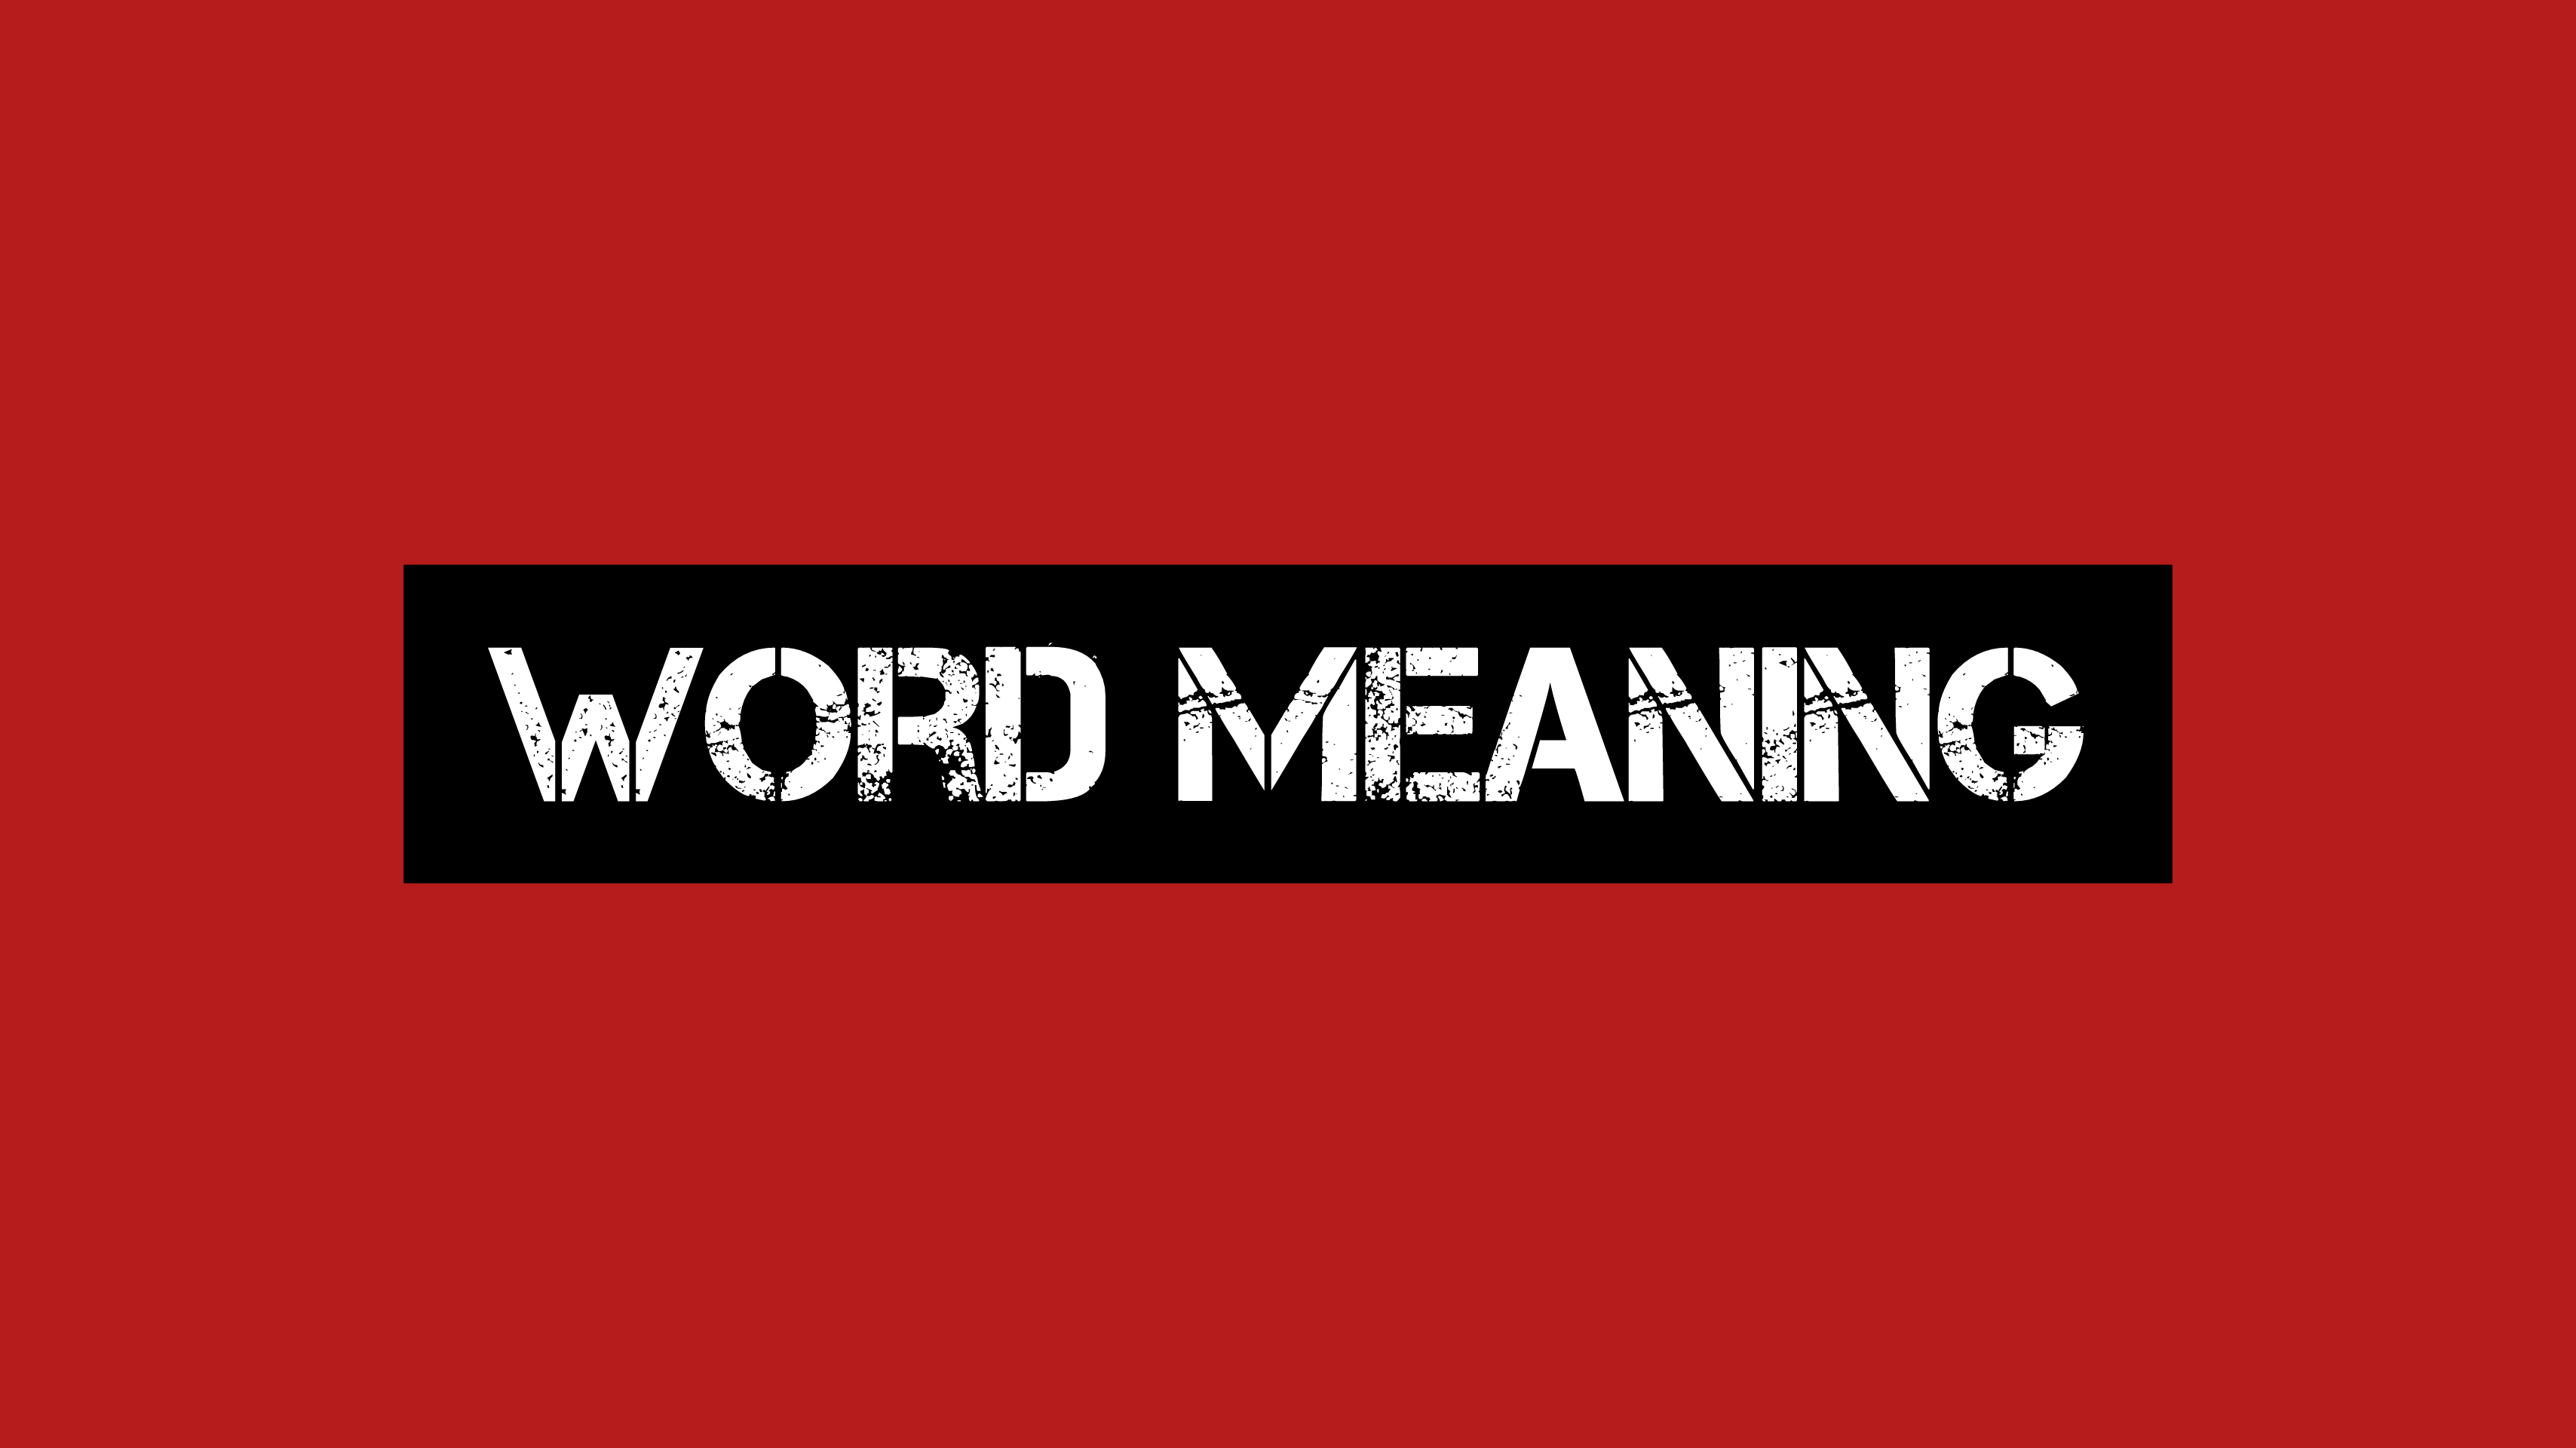 Orienting meaning in bengali | Bangla Meaning | Dictionary English to Bangla